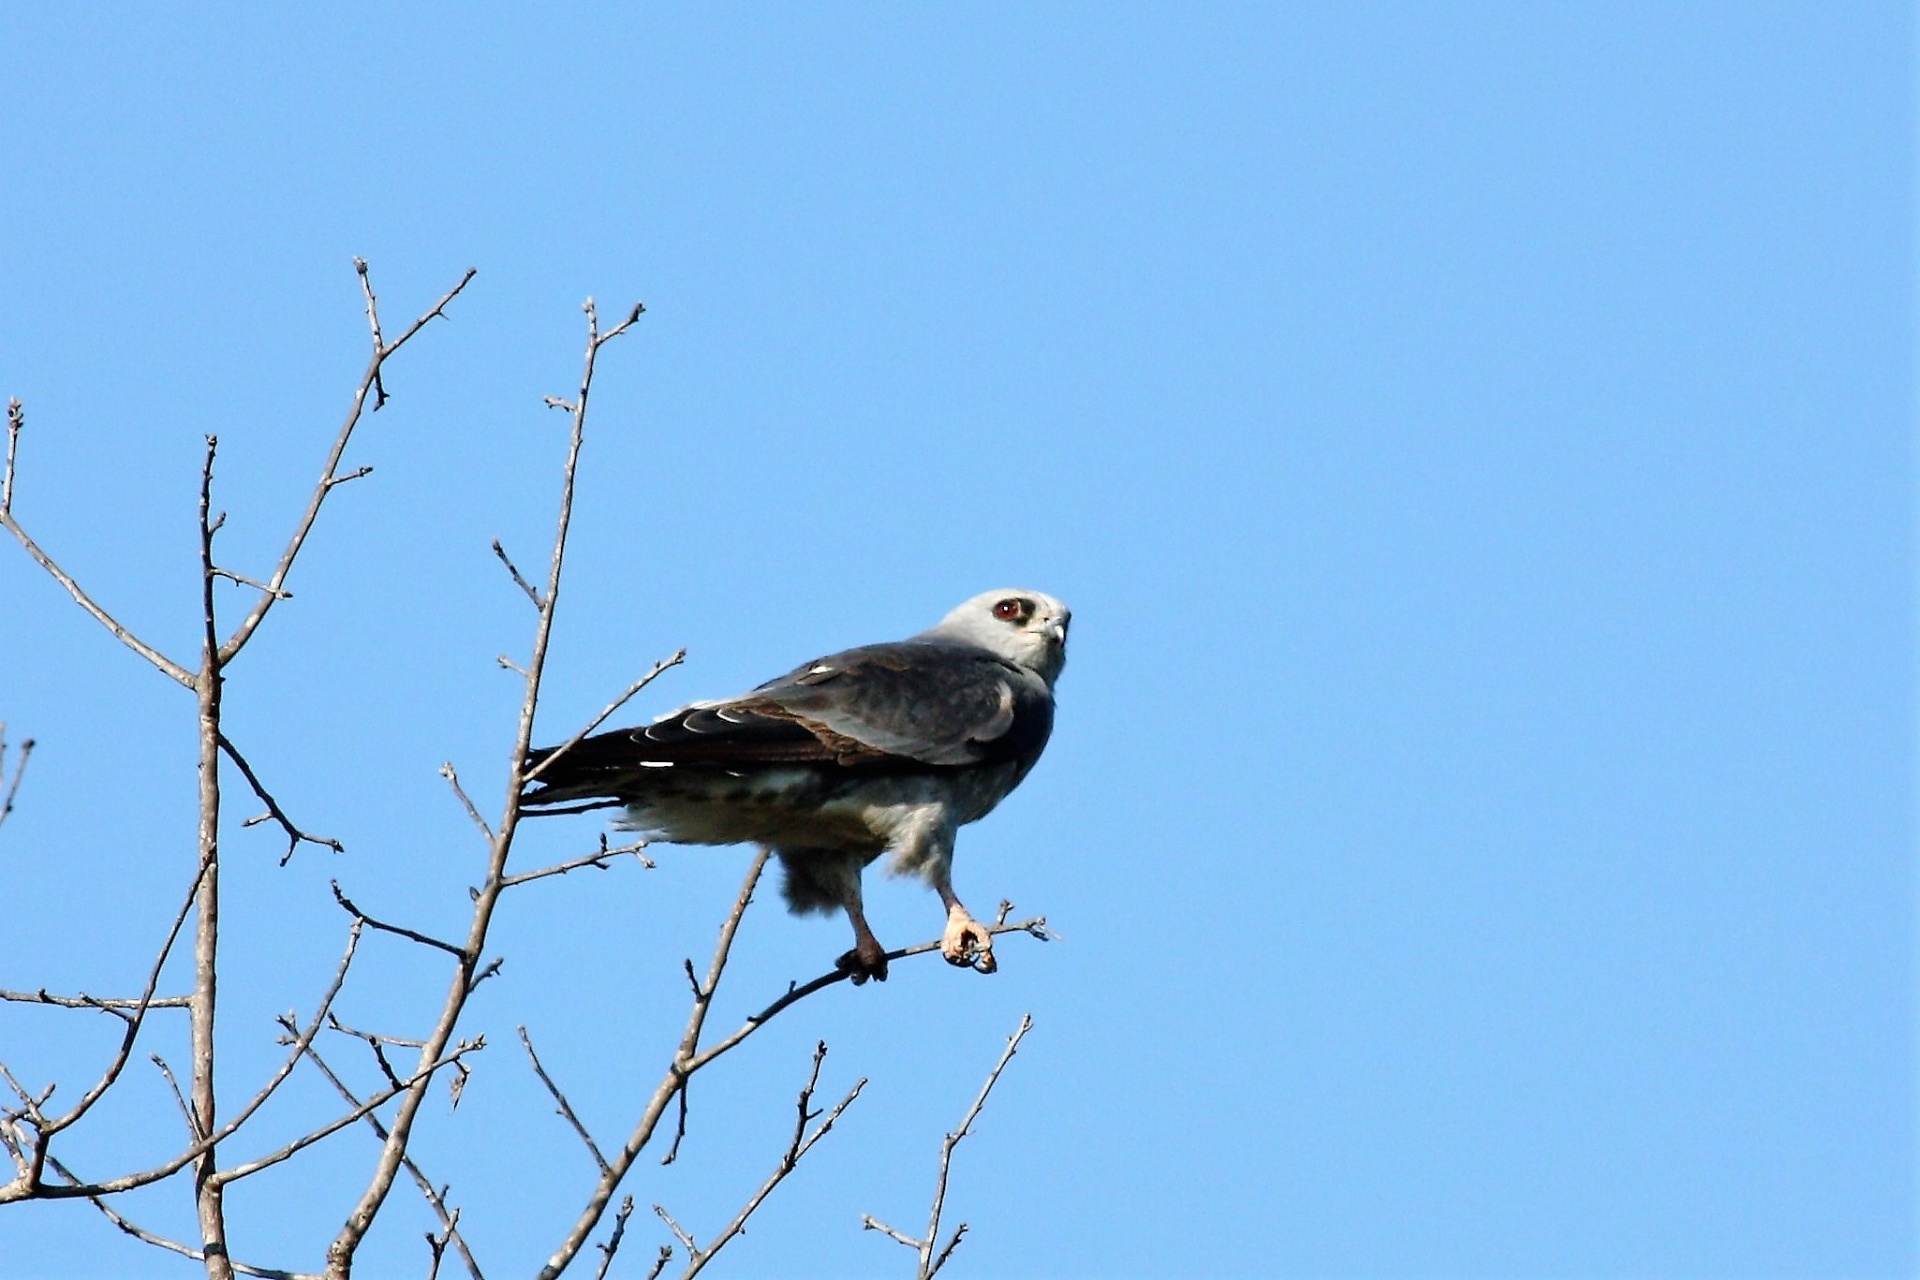 A Mississippi kite bird of prey is clinging to branches at the top of a tree, on a blue sky background.